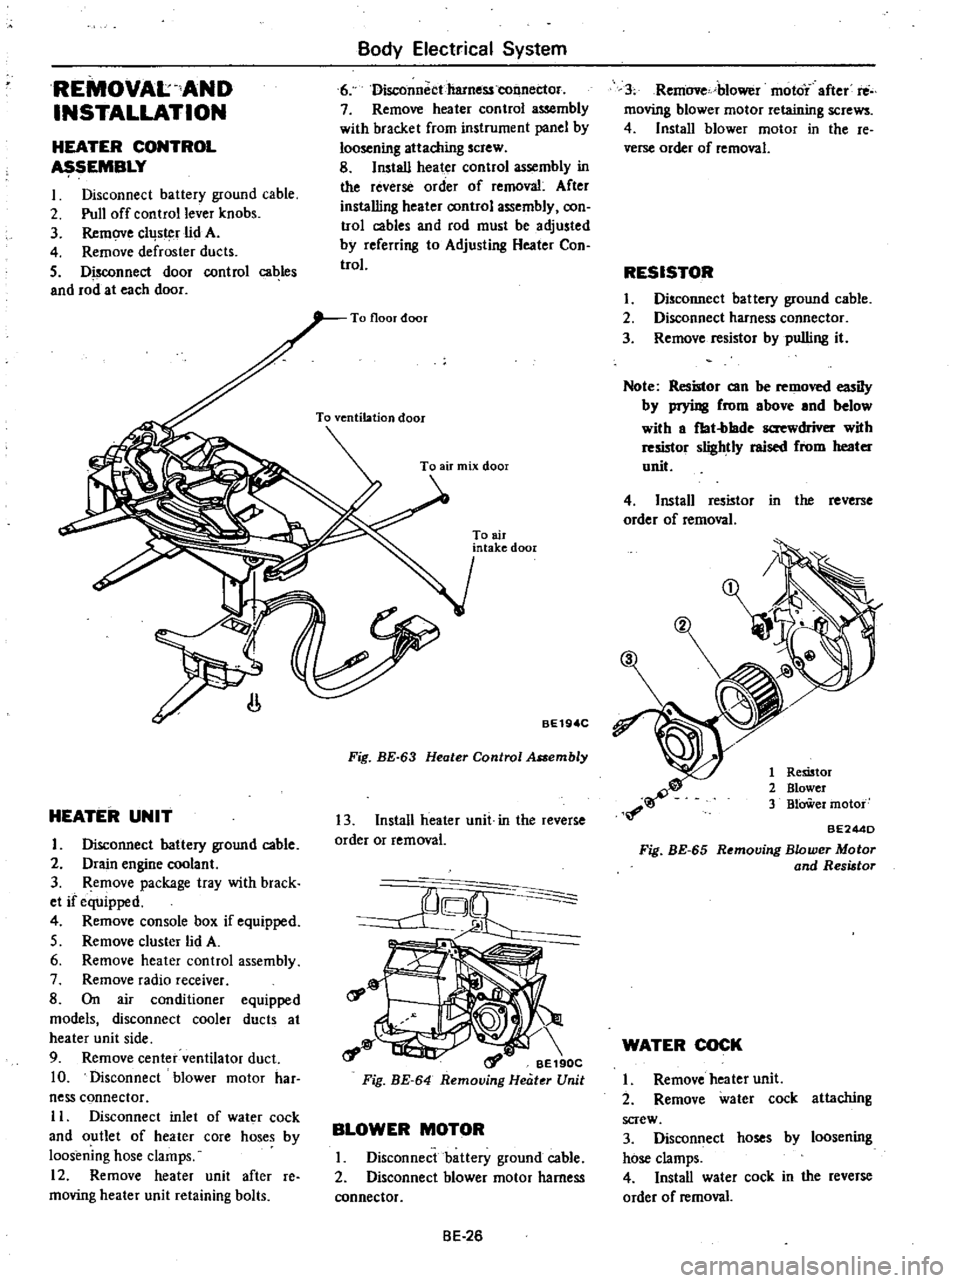 DATSUN 210 1979  Service Manual 
REMOVAL 
AND

INSTALLATION

HEATER 
CONTROL

SEMBLY

I 
Disconnect

battery

ground 
cable

2 
Pull 
off

control 
lever

knobs

3 
Remove

cllJs 
r

lid 
A

4 
Remove 
defroster 
ducts

5 
Disconnec